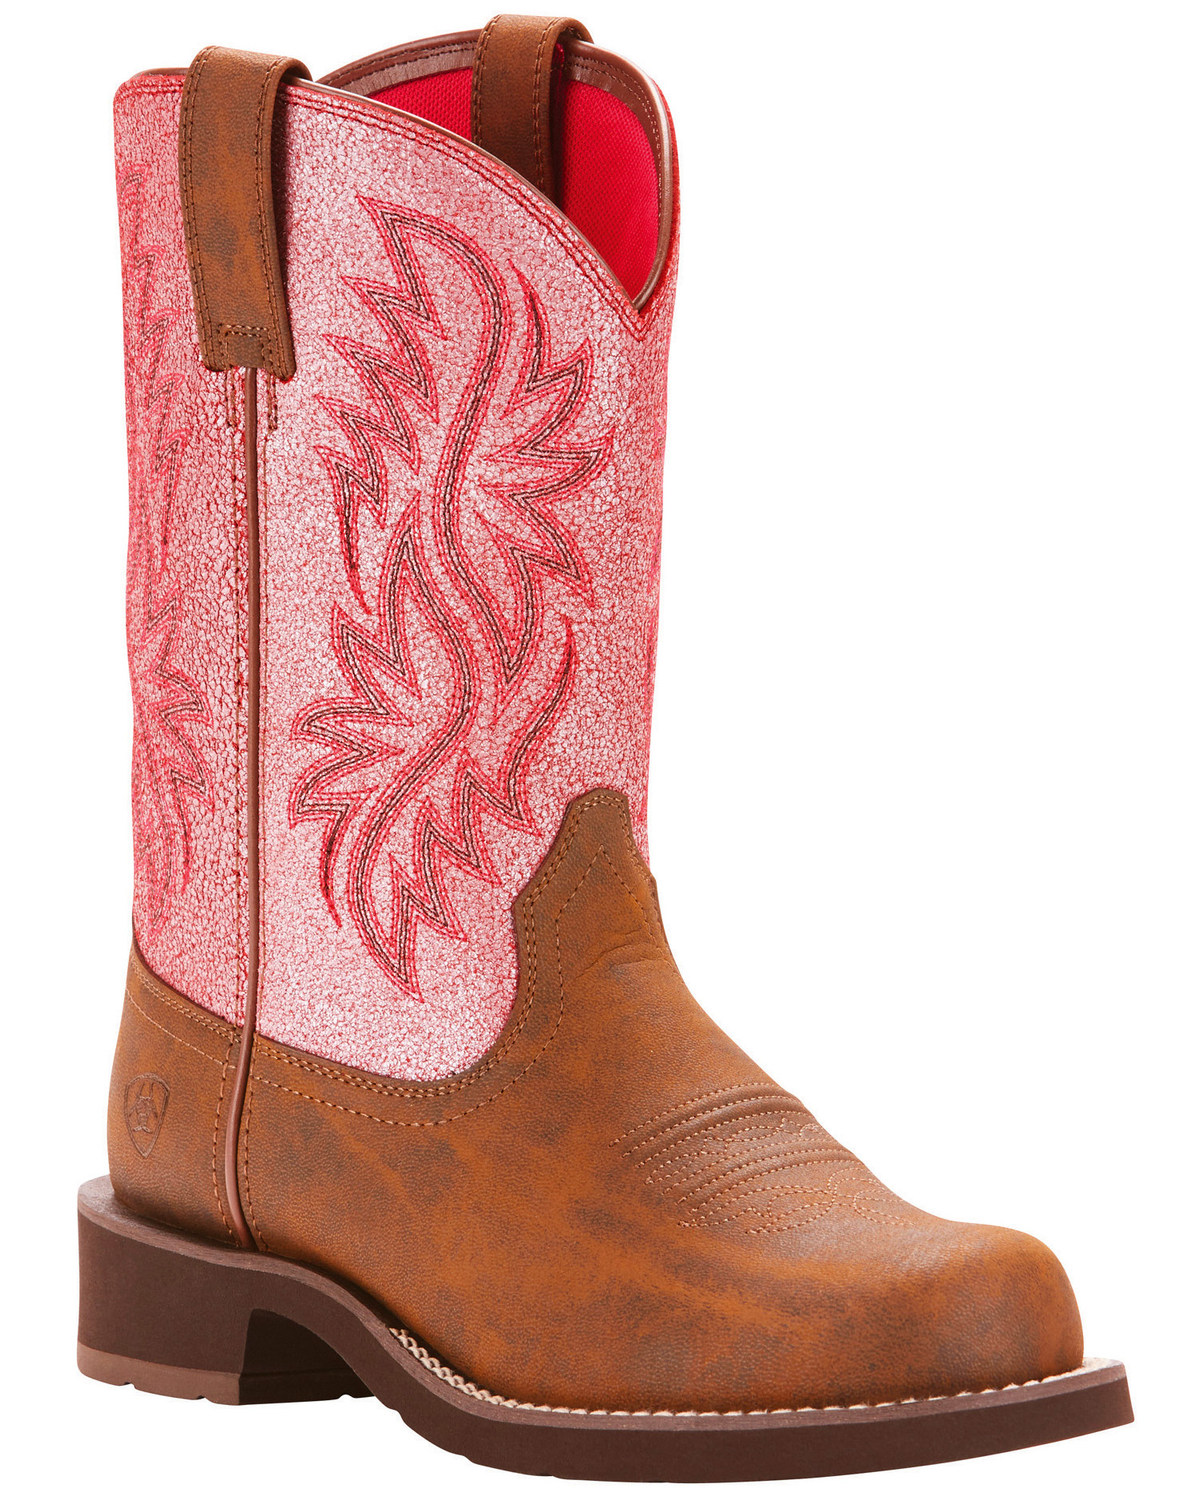 Ariat Fatbaby Women's Heritage Tall 